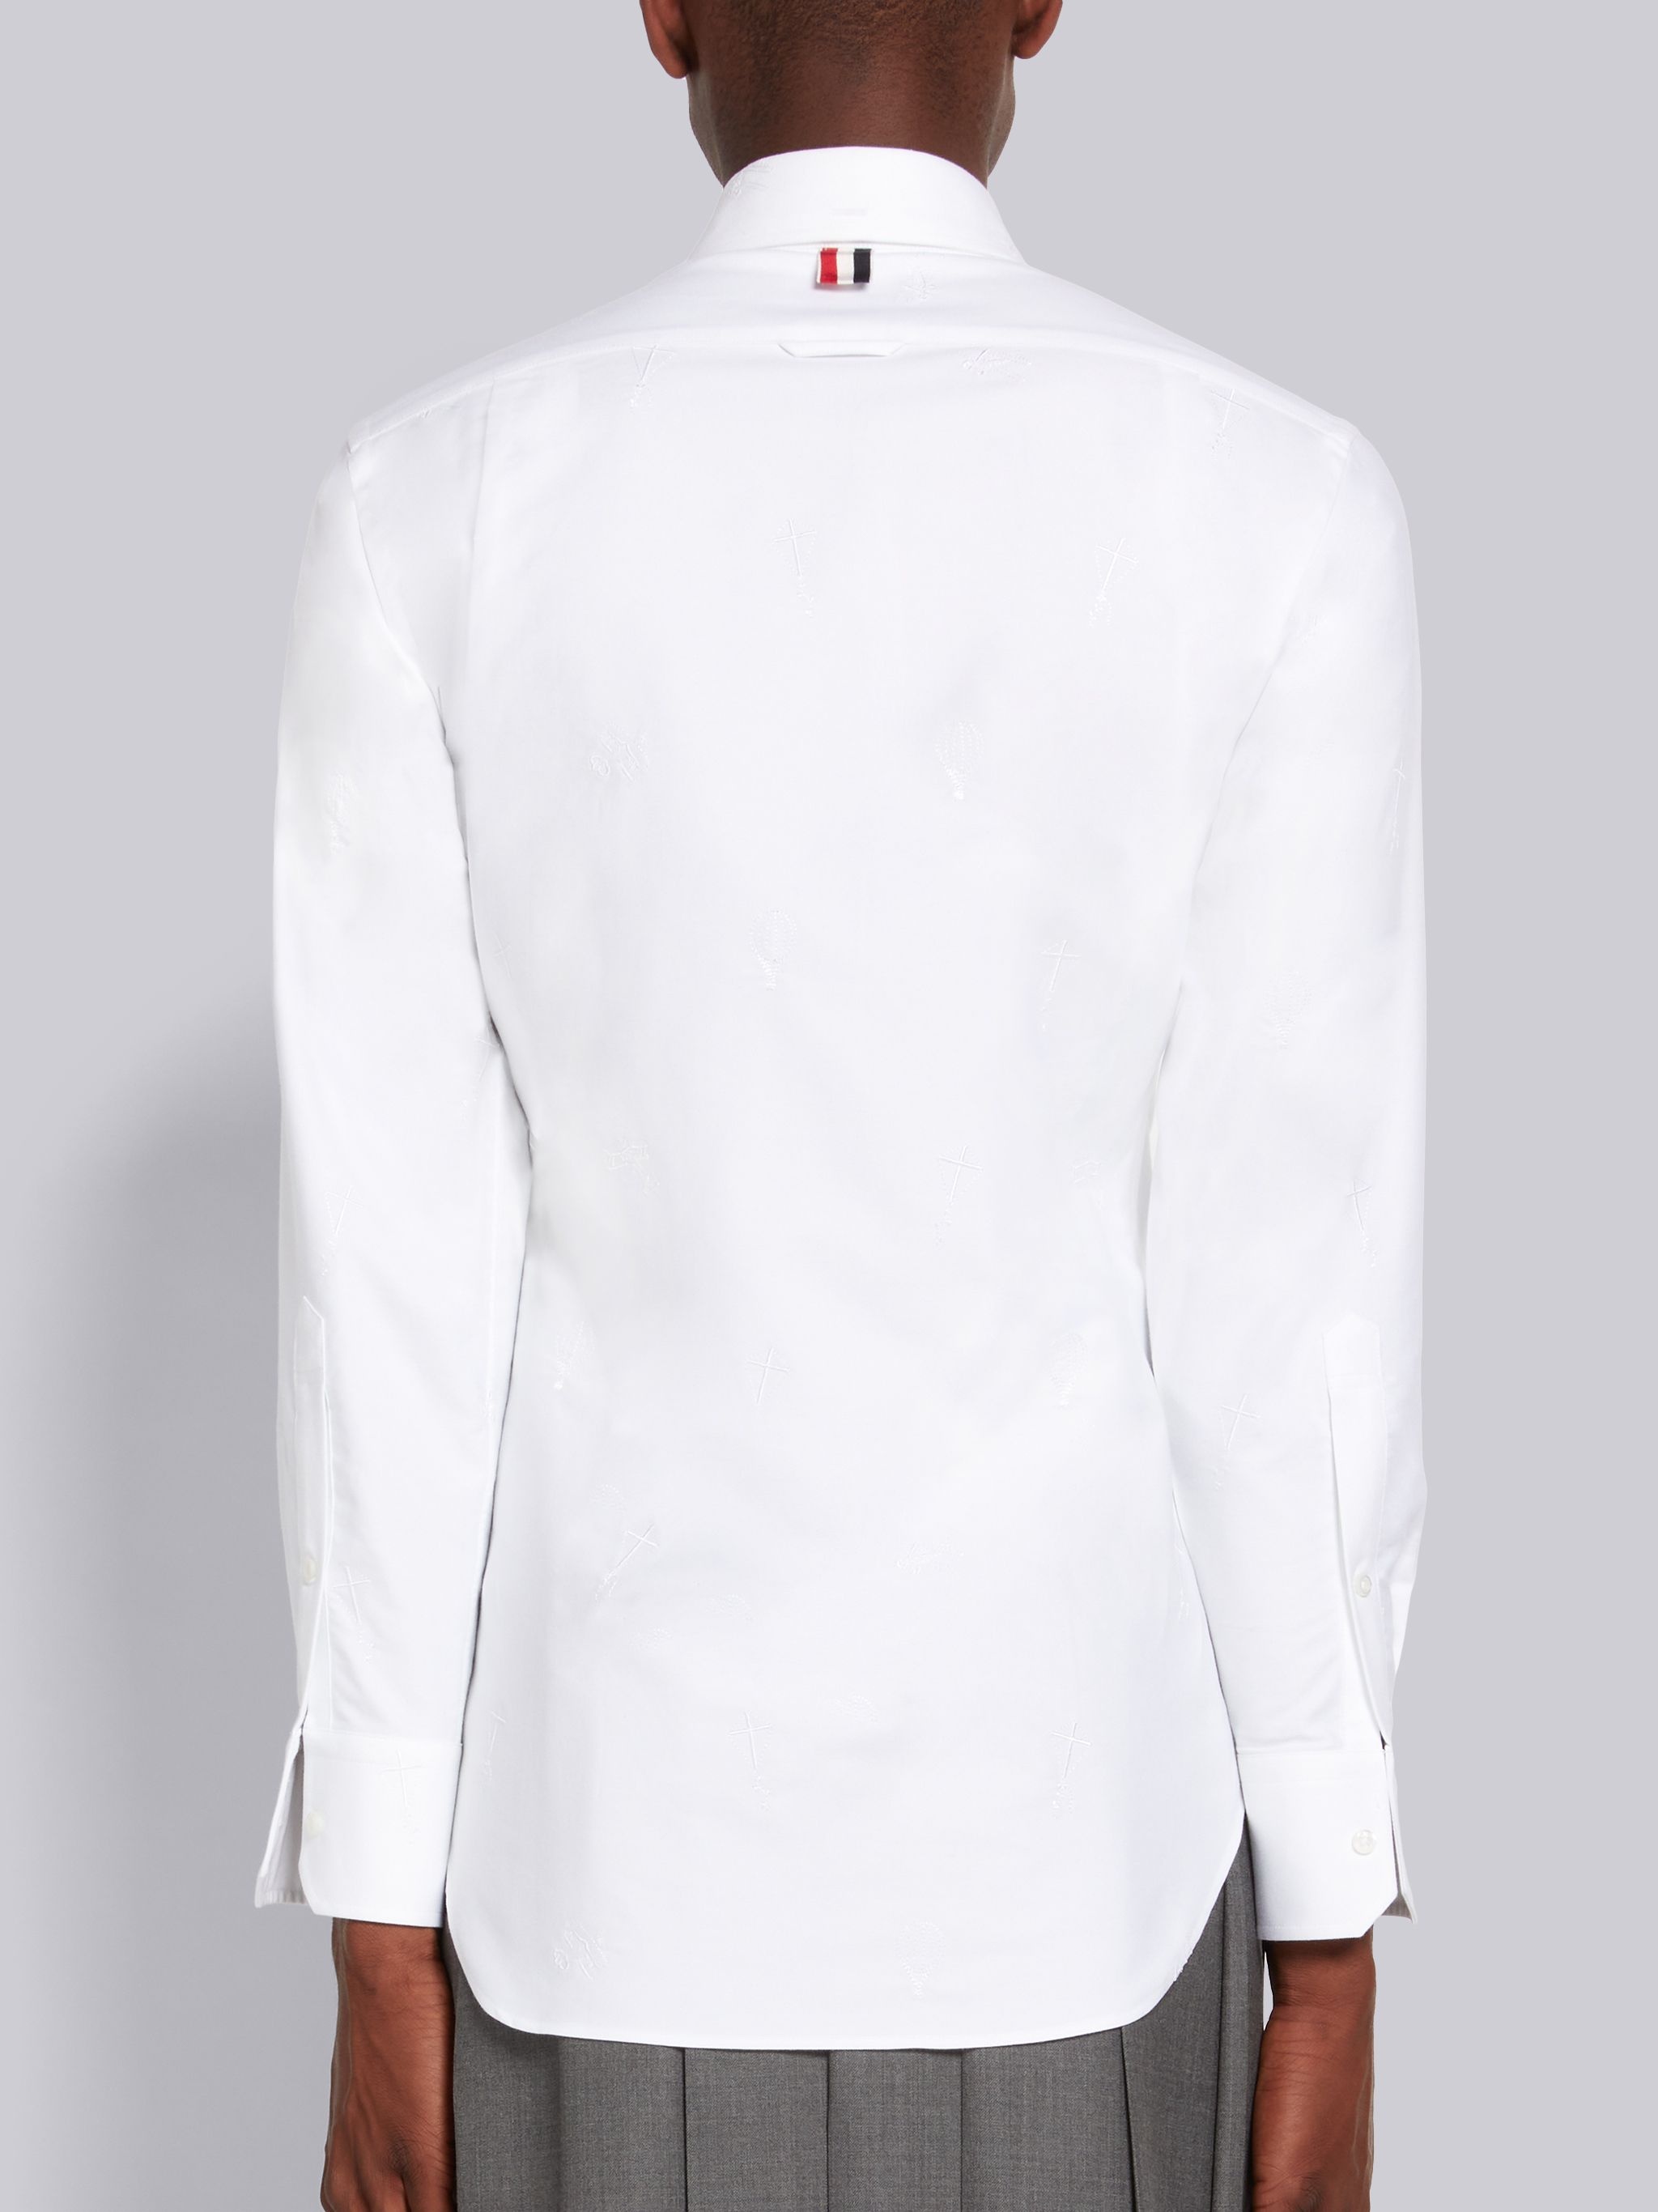 White Oxford Embroidered Half Drop Sky Icon Classic Fit Shirt - 4